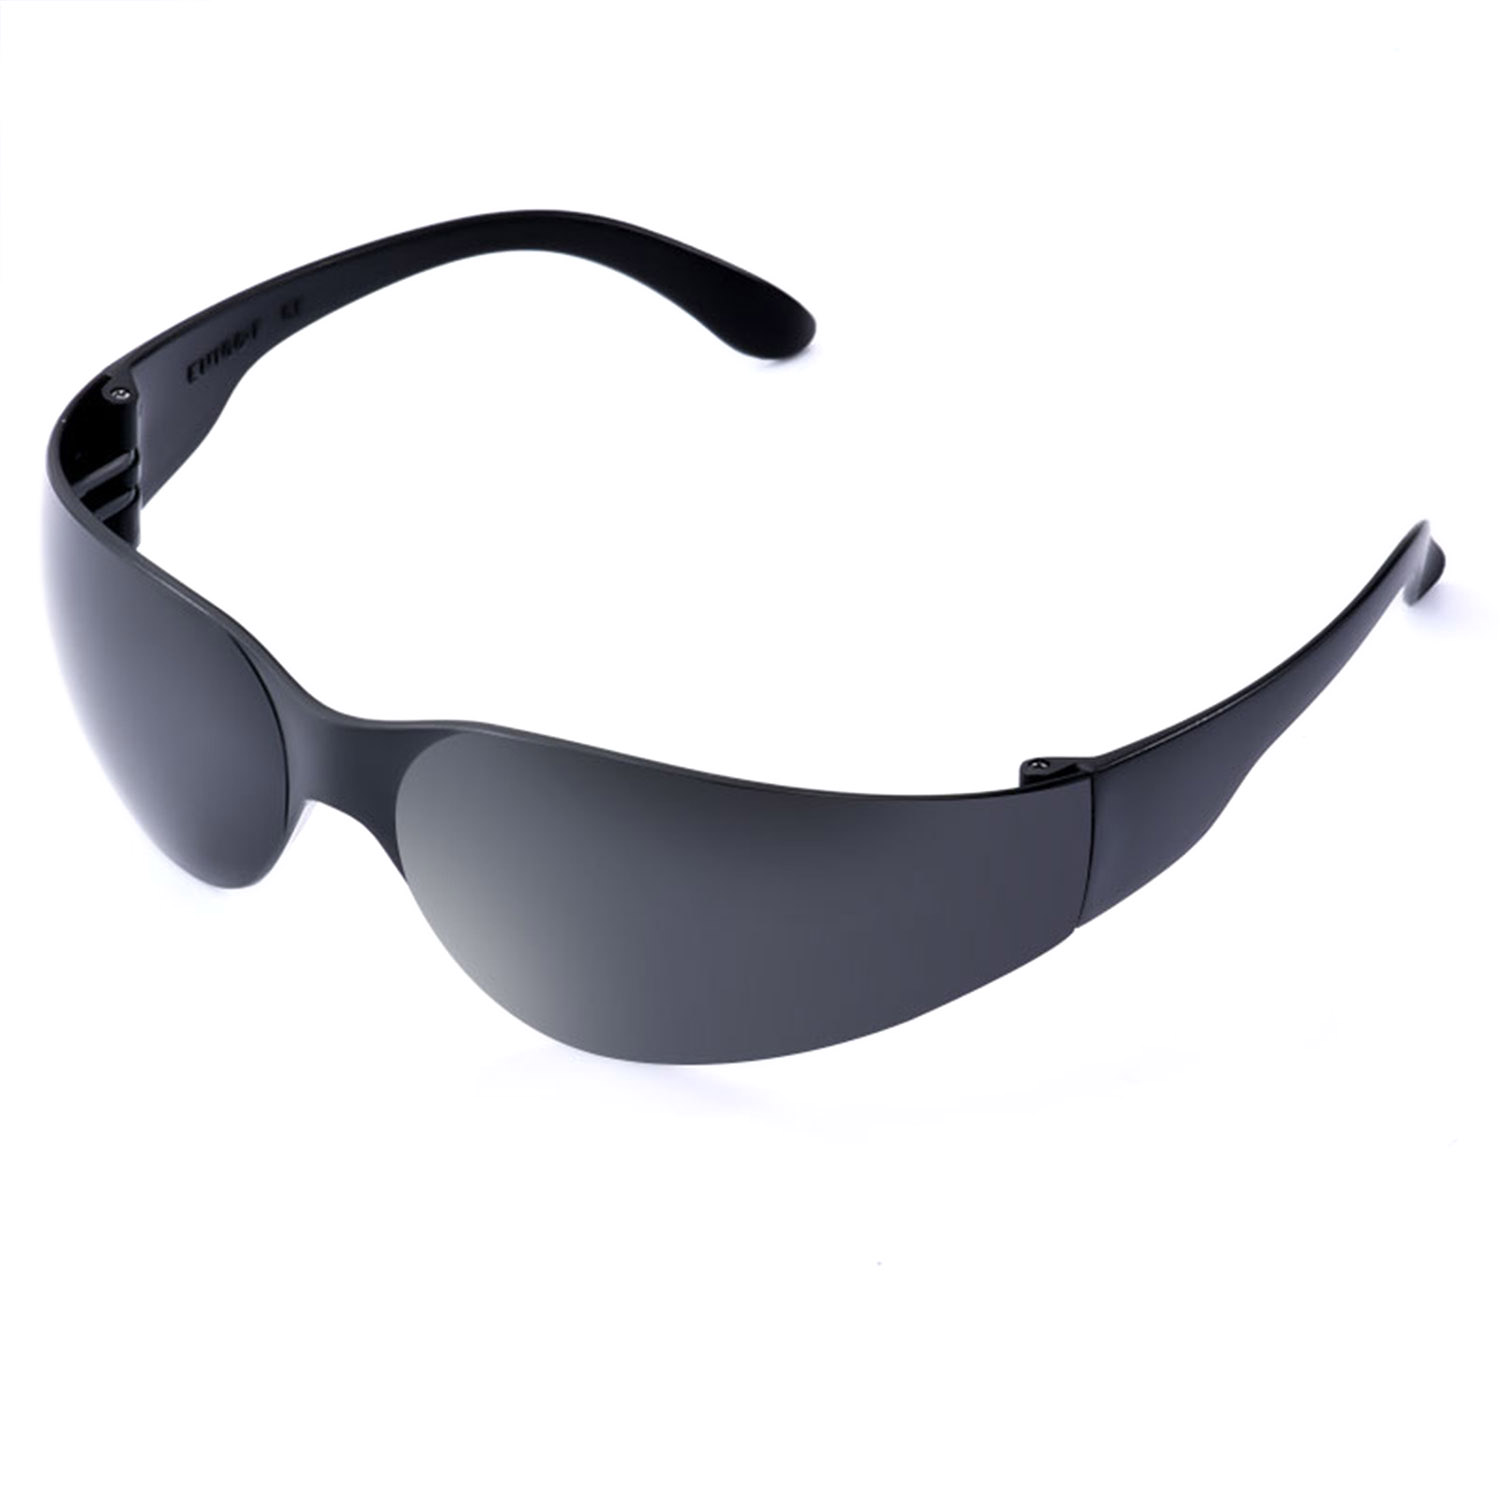 Ready Stock Protective Sunglasses SG001 Black from China